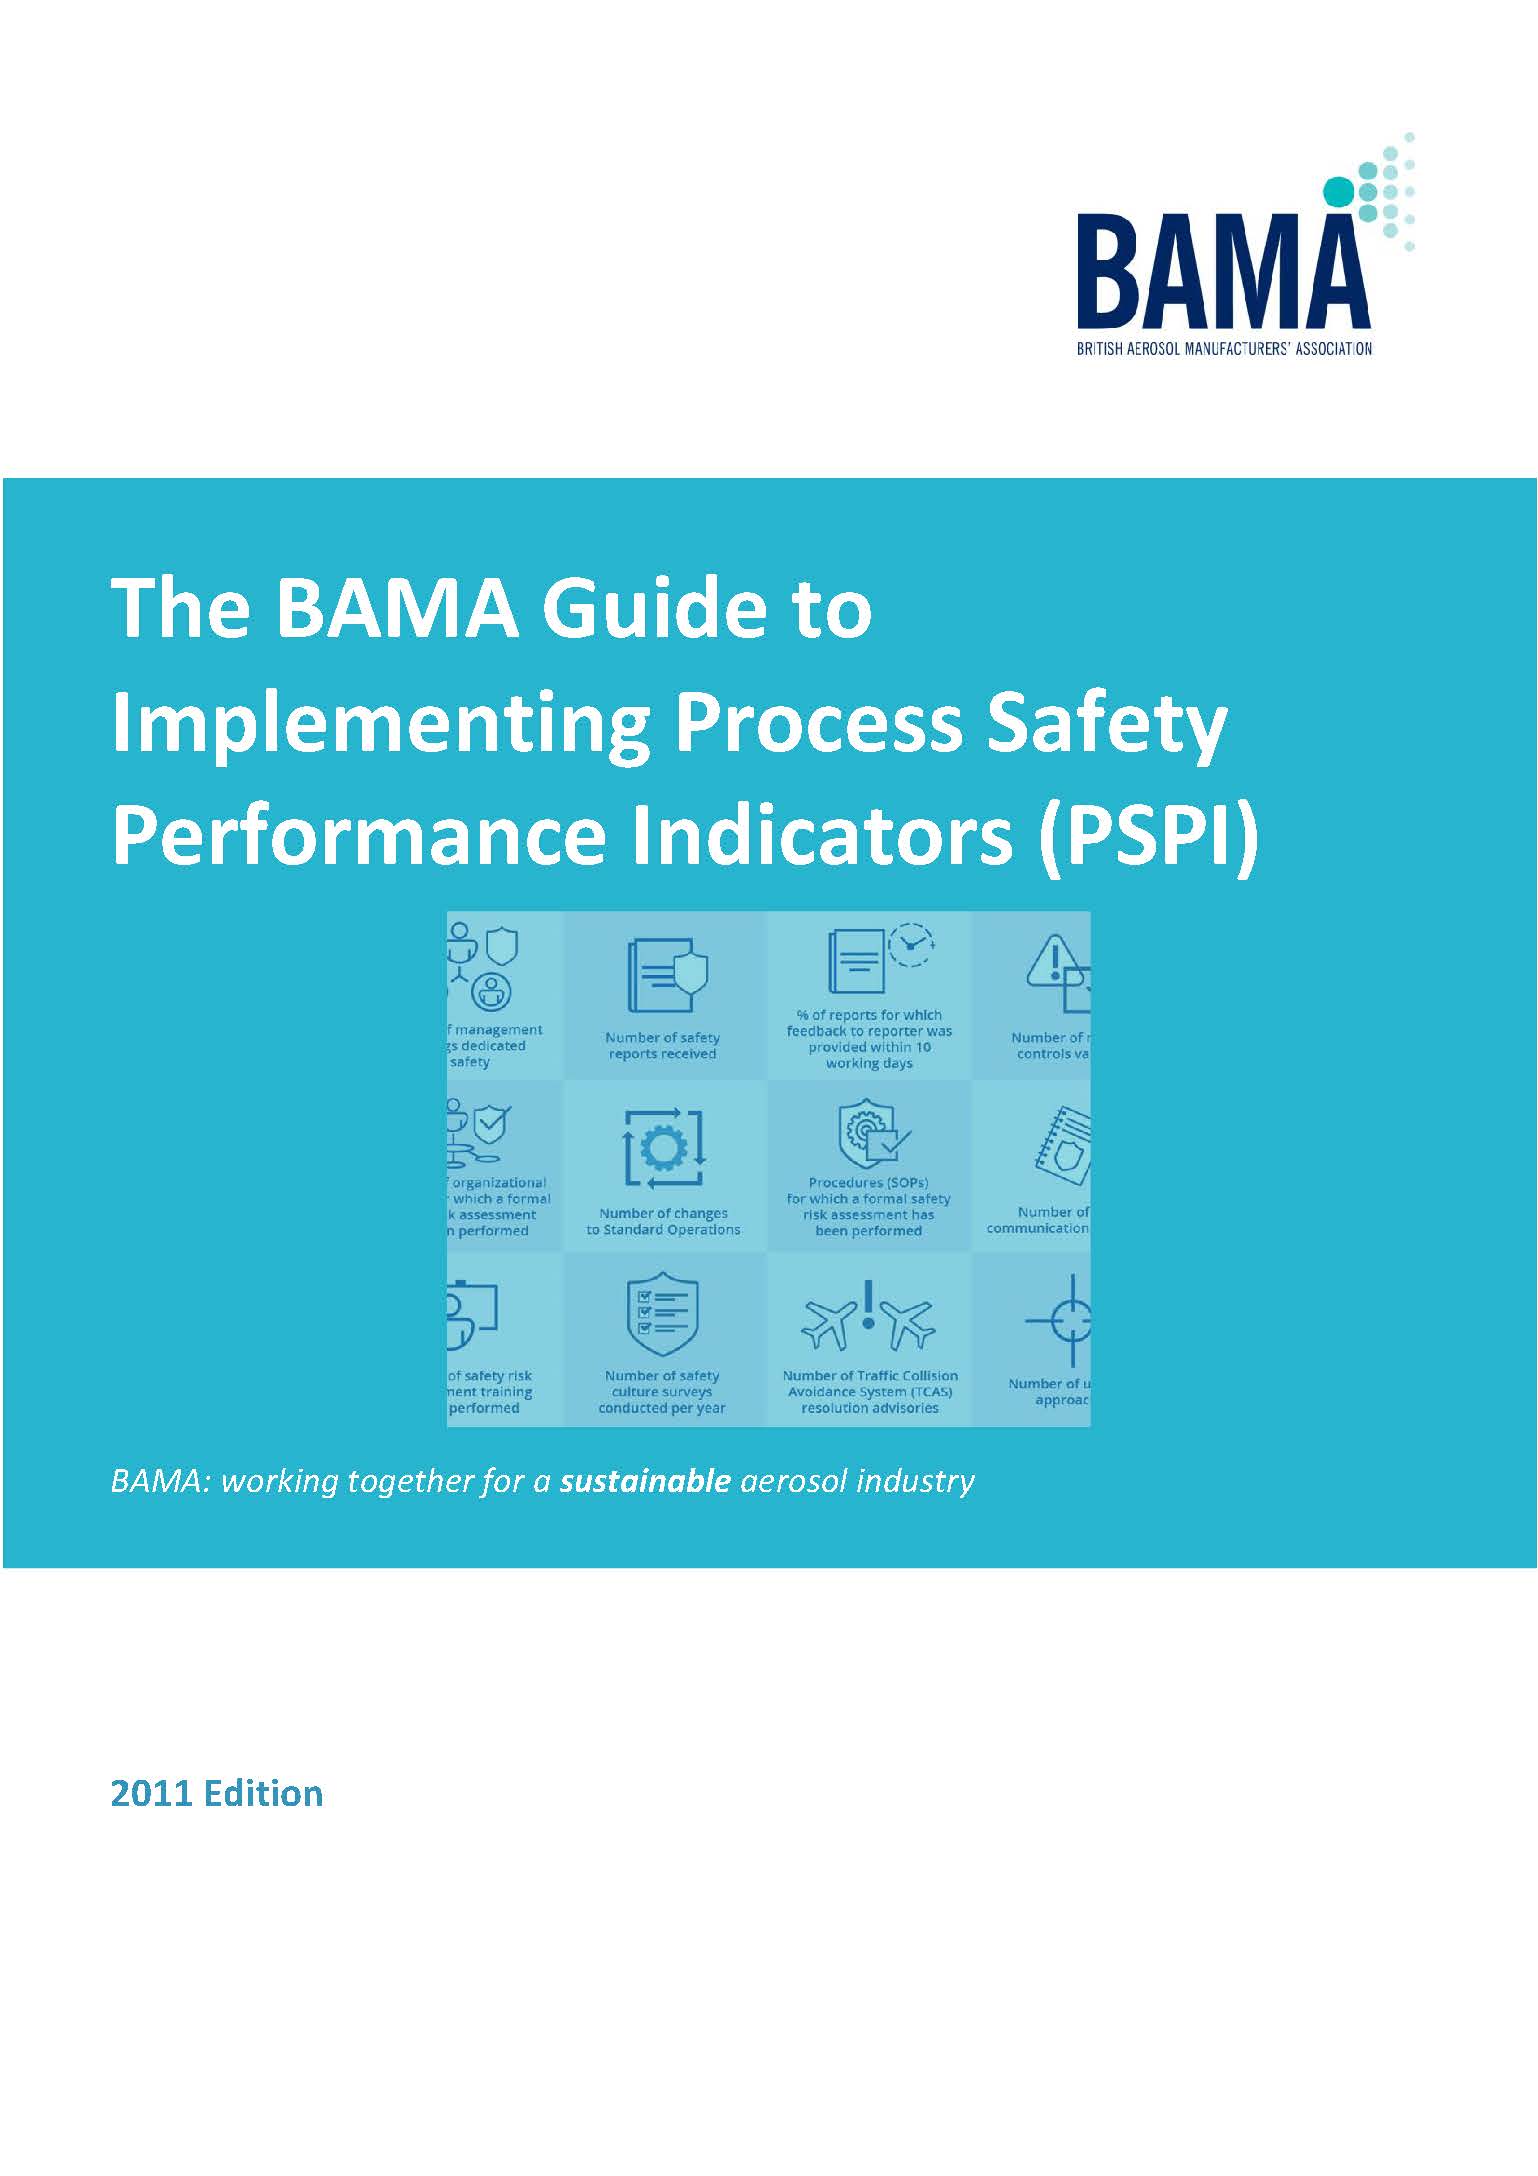 BAMA Guide to implementing Process Safety Performance Indicators